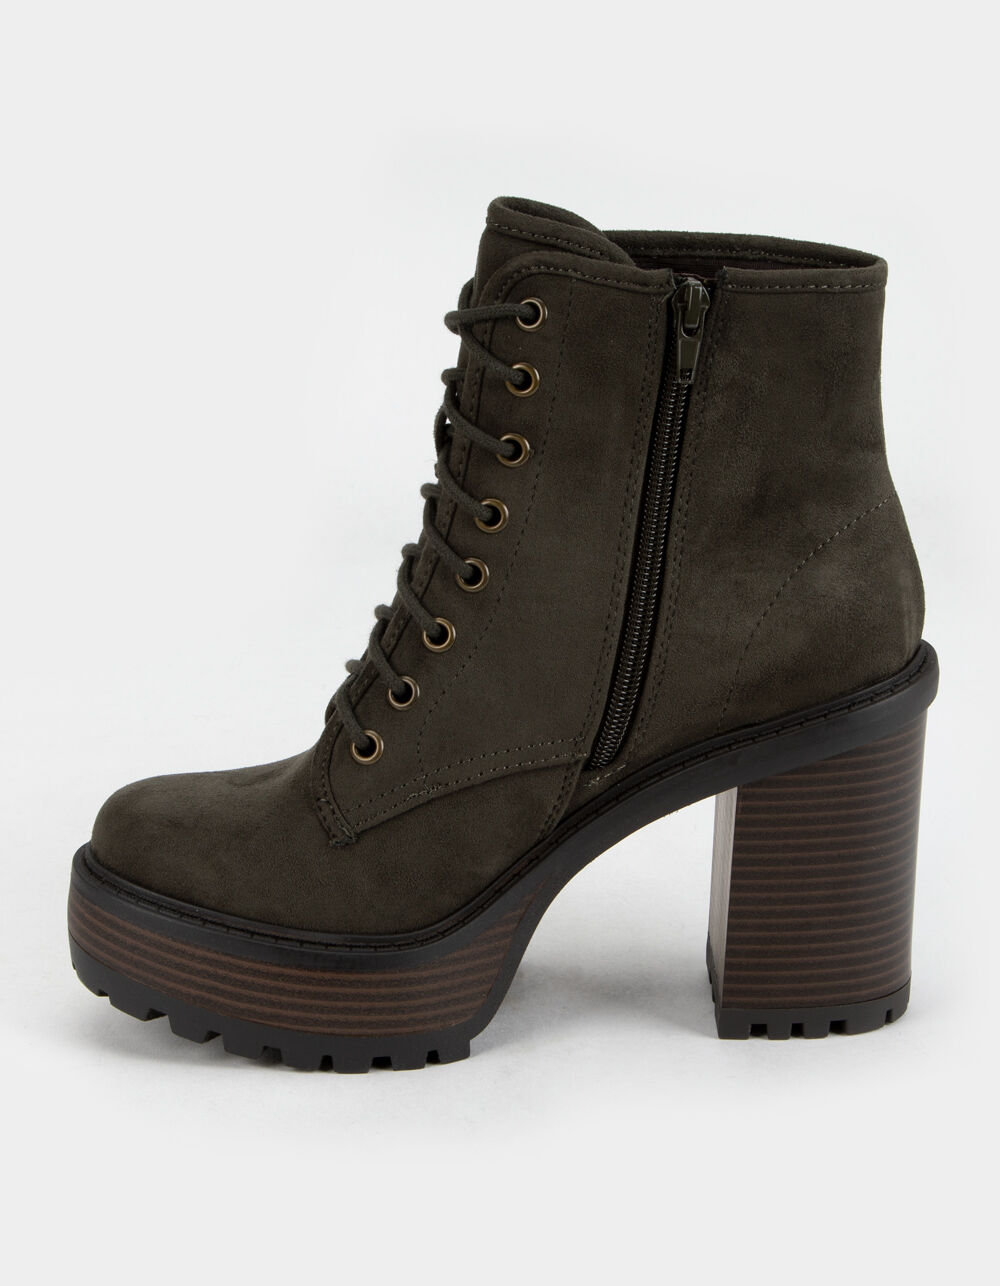 SODA Lace Up Womens Platform Booties - OLIVE | Tillys